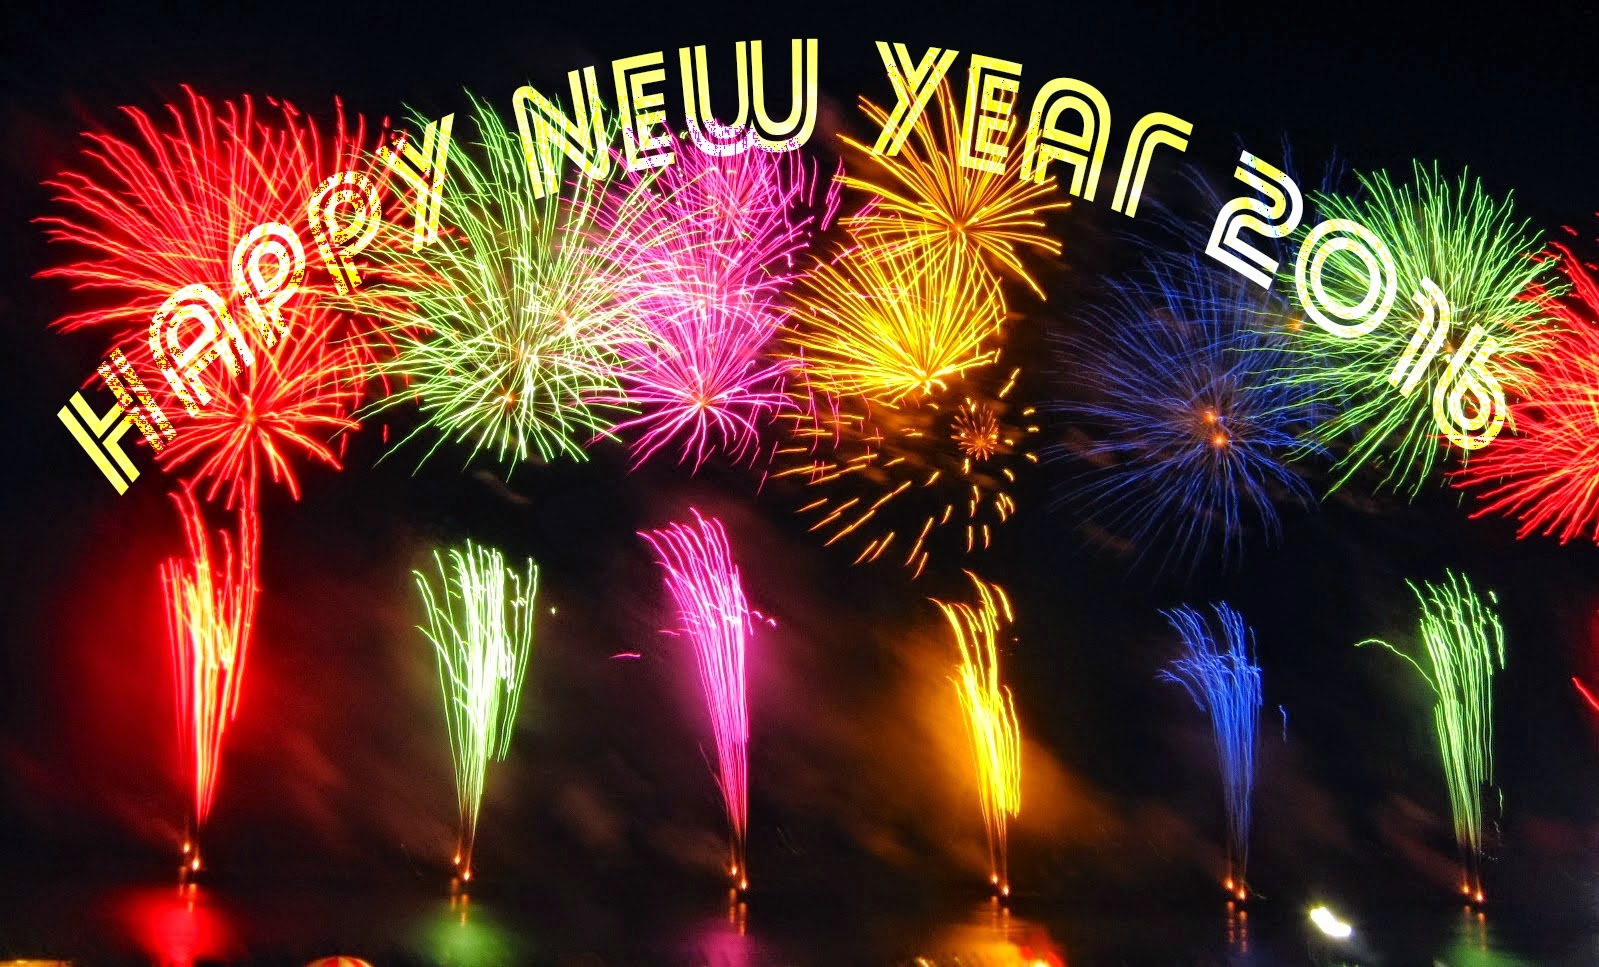 New Year Image Wishes Years Eve